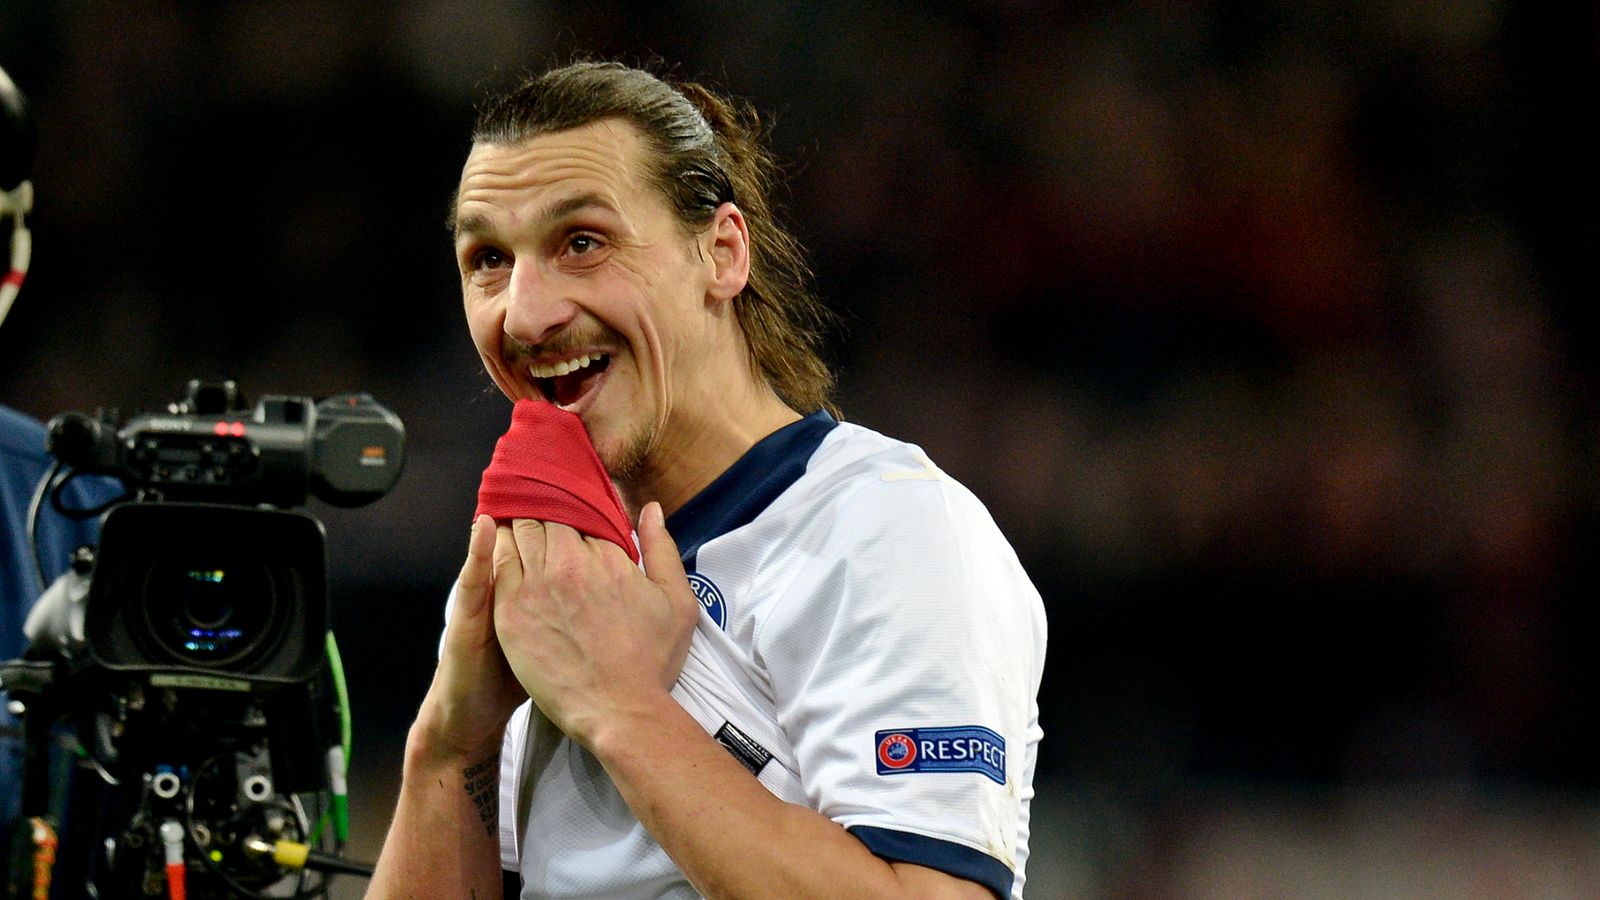 Zlatan Ibrahimovic says Chelsea are the "super" hot favourites against